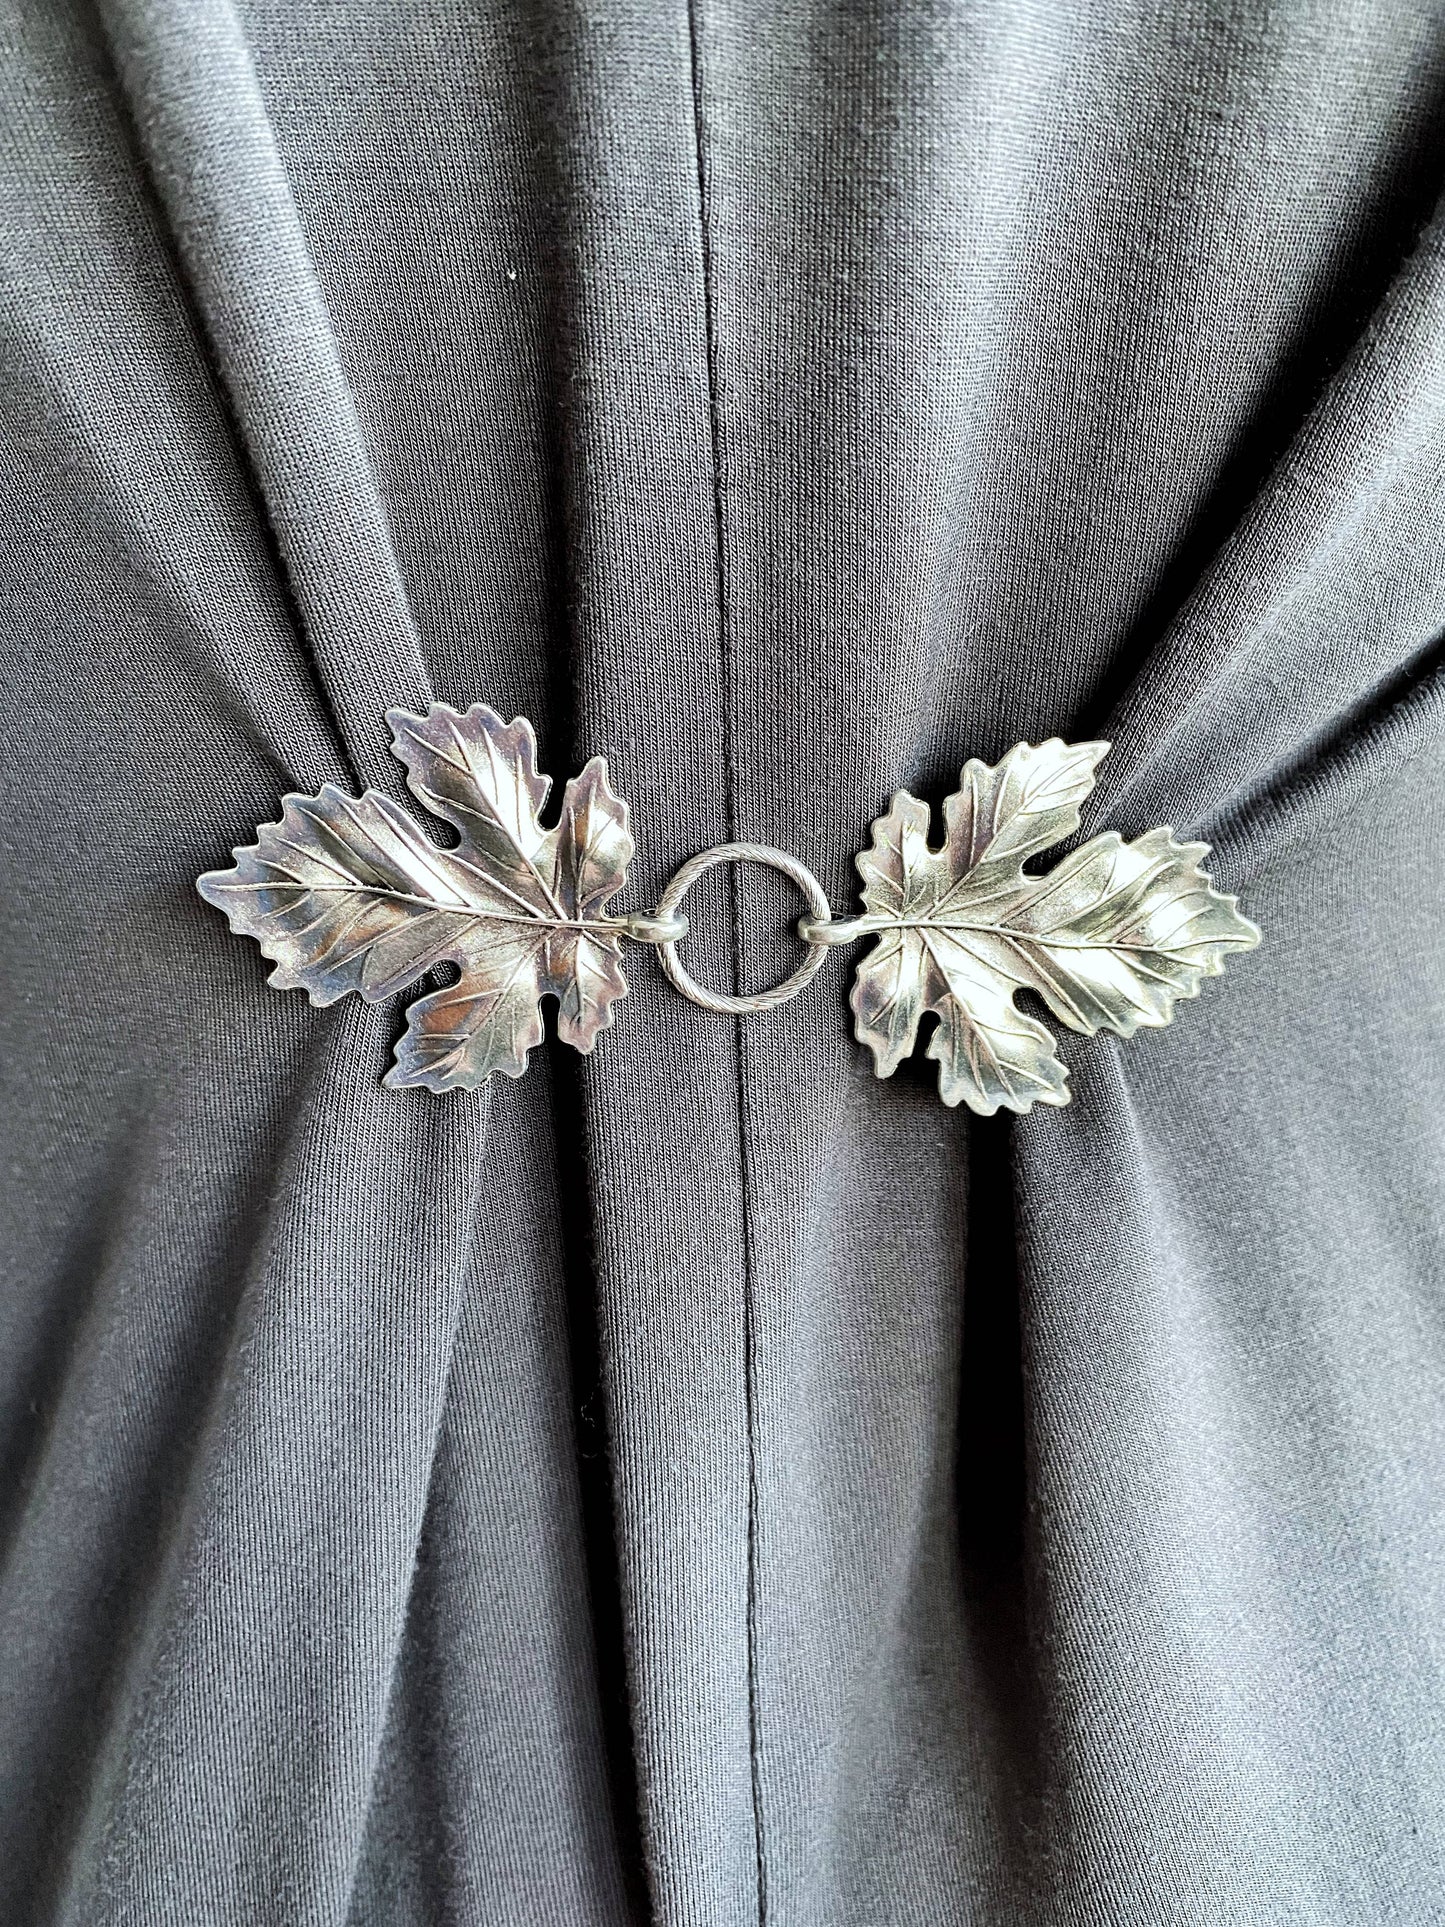 Cloak Clip - Silver Metal, Double Leaf Clothing Clasp